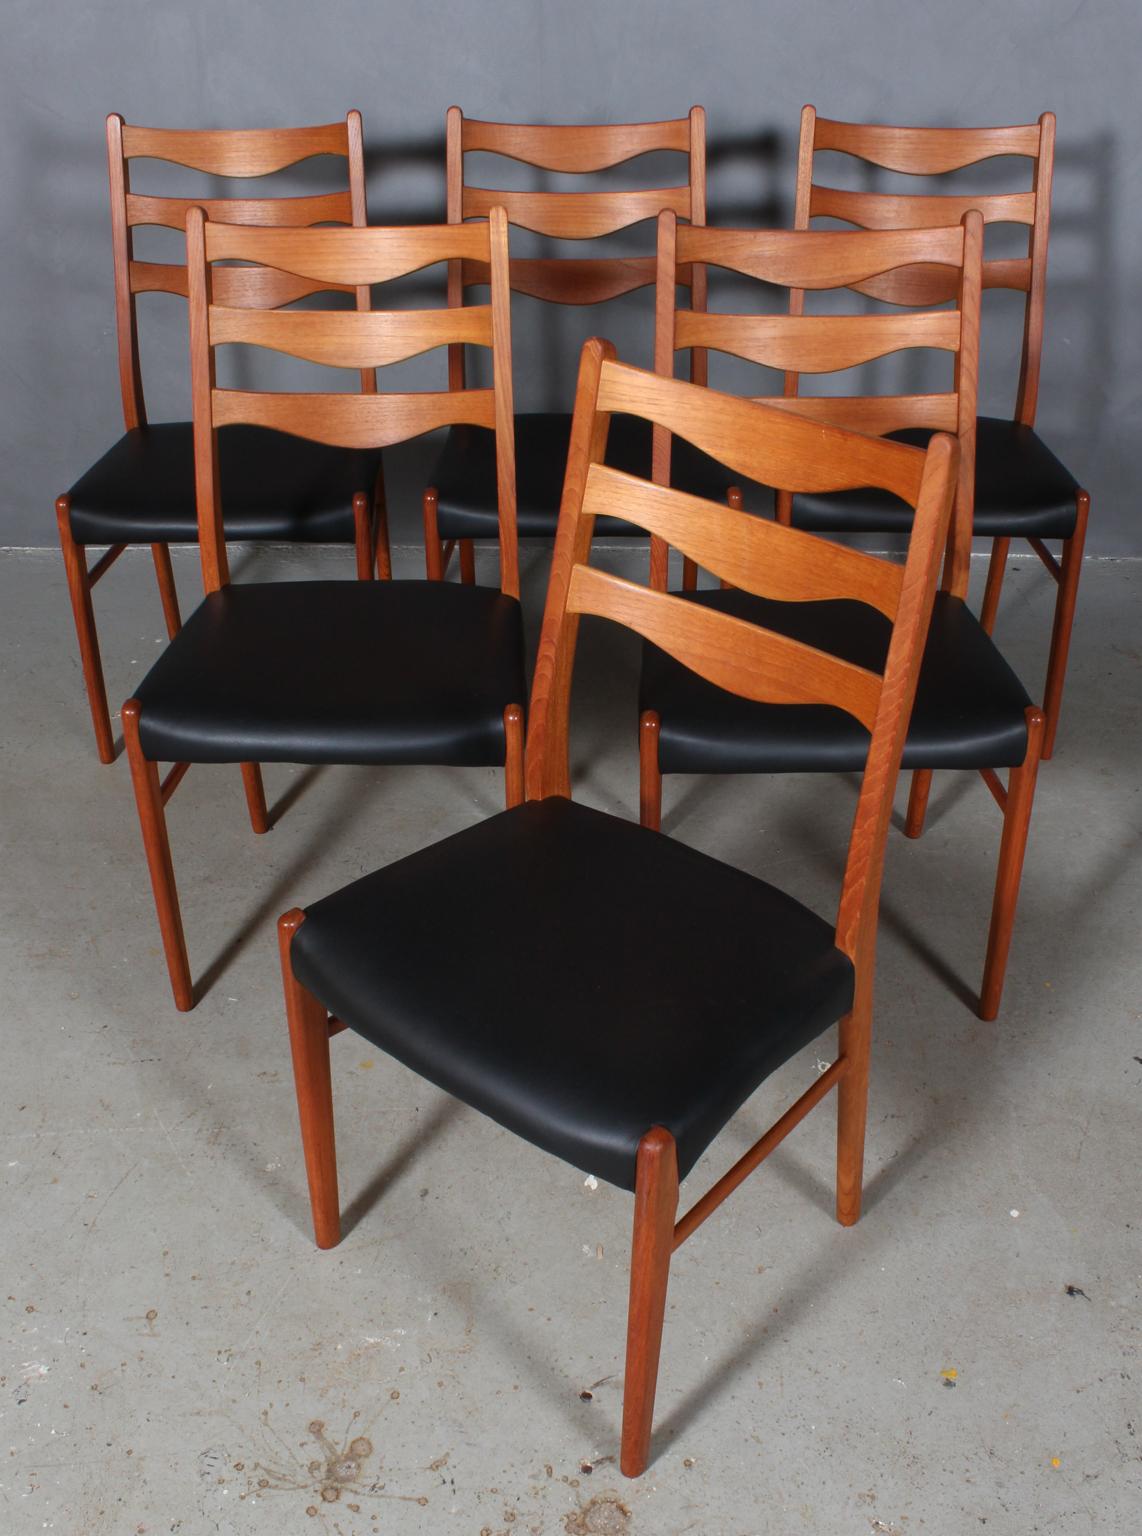 Six dining chairs designed by Arne Wah for Glyngore Stolefabrik. 

Chairs crafted of solid teak with new upholstered seats in black aniline leather.